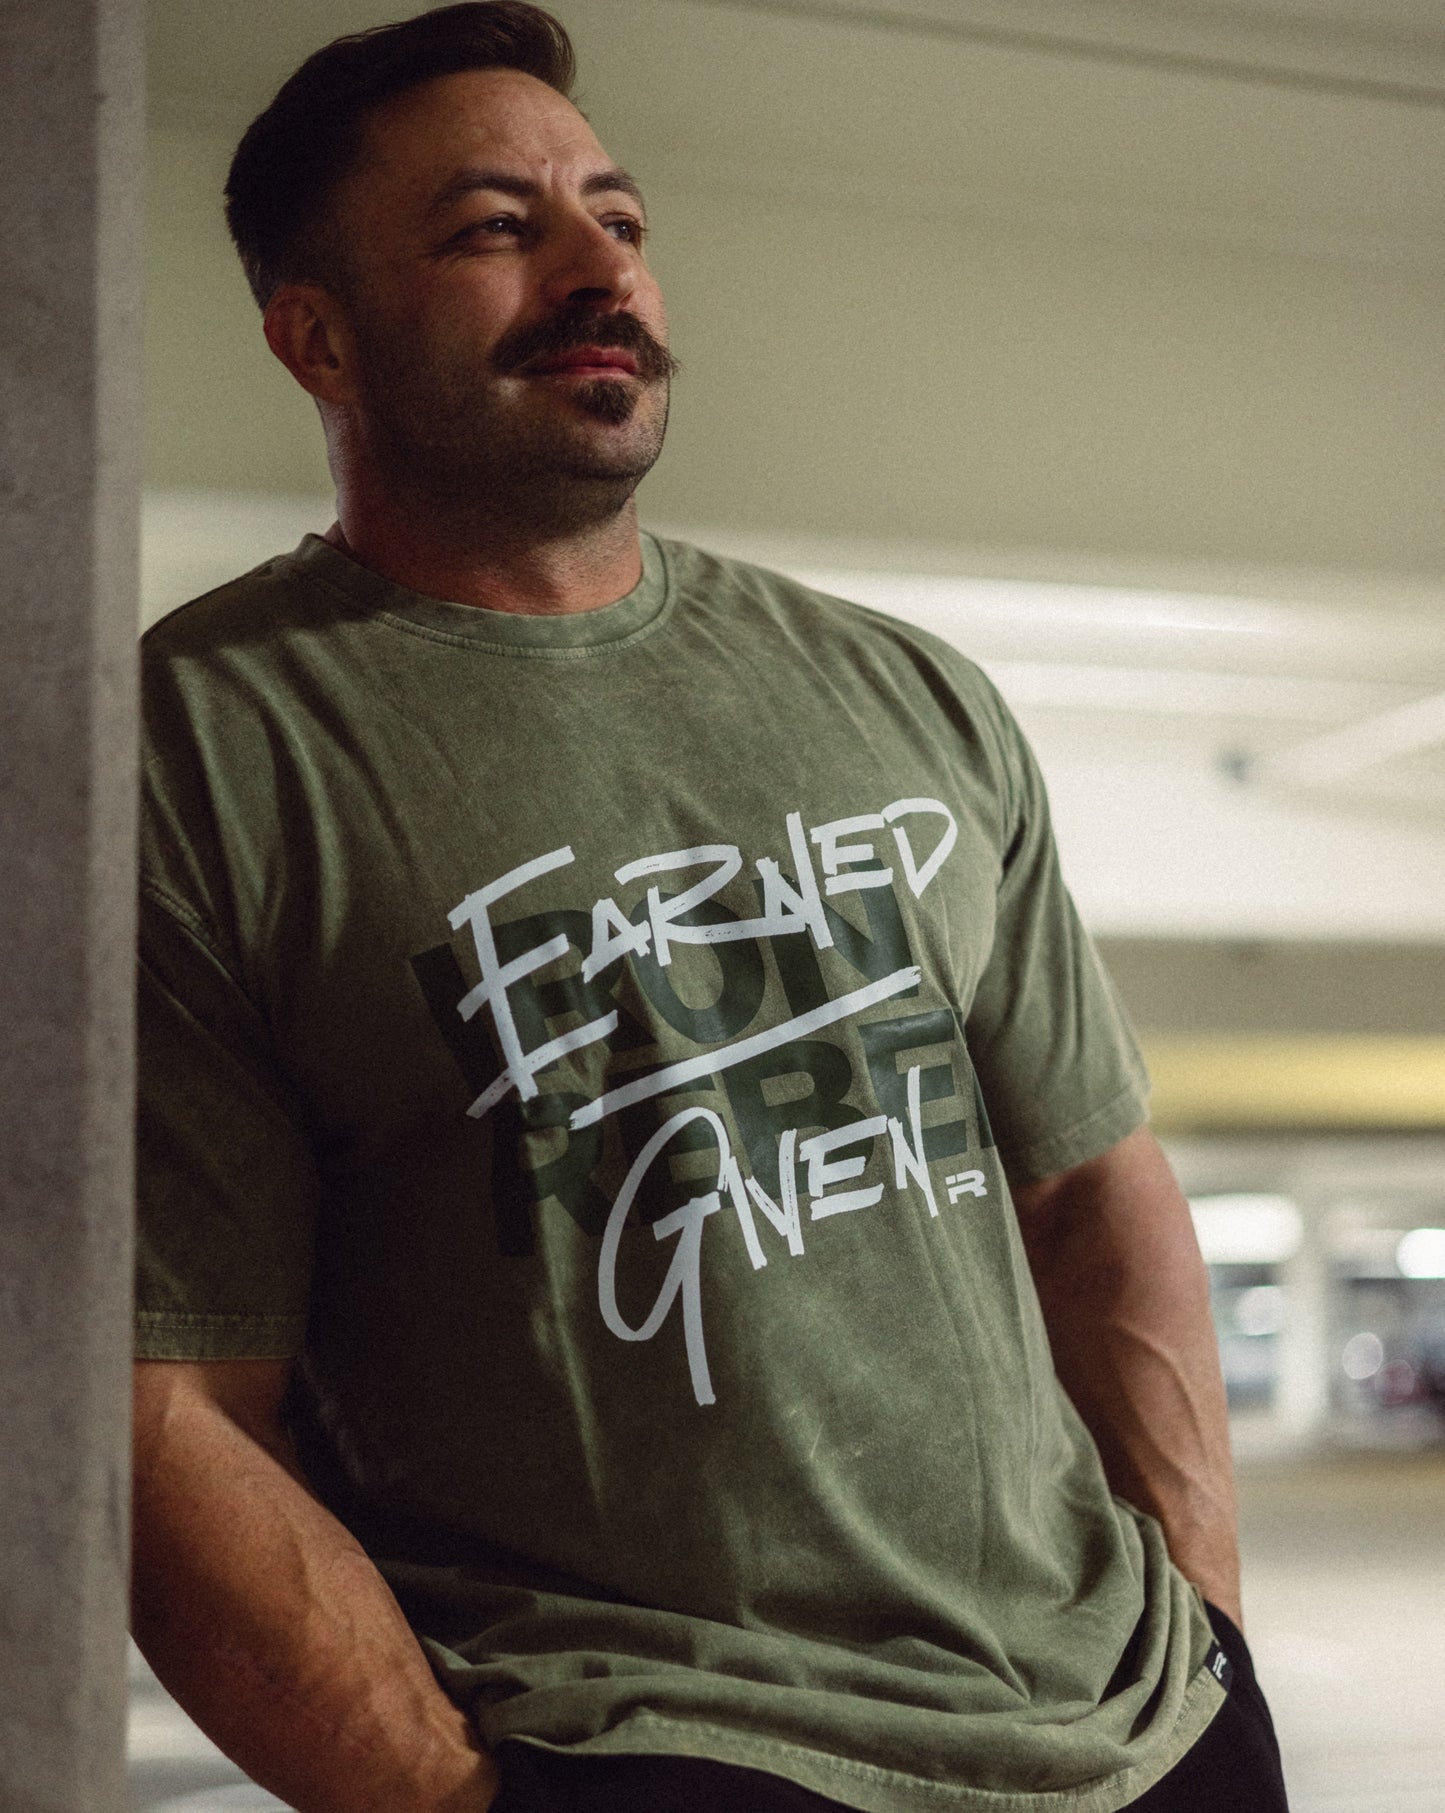 Earned/Given Tee (Army)